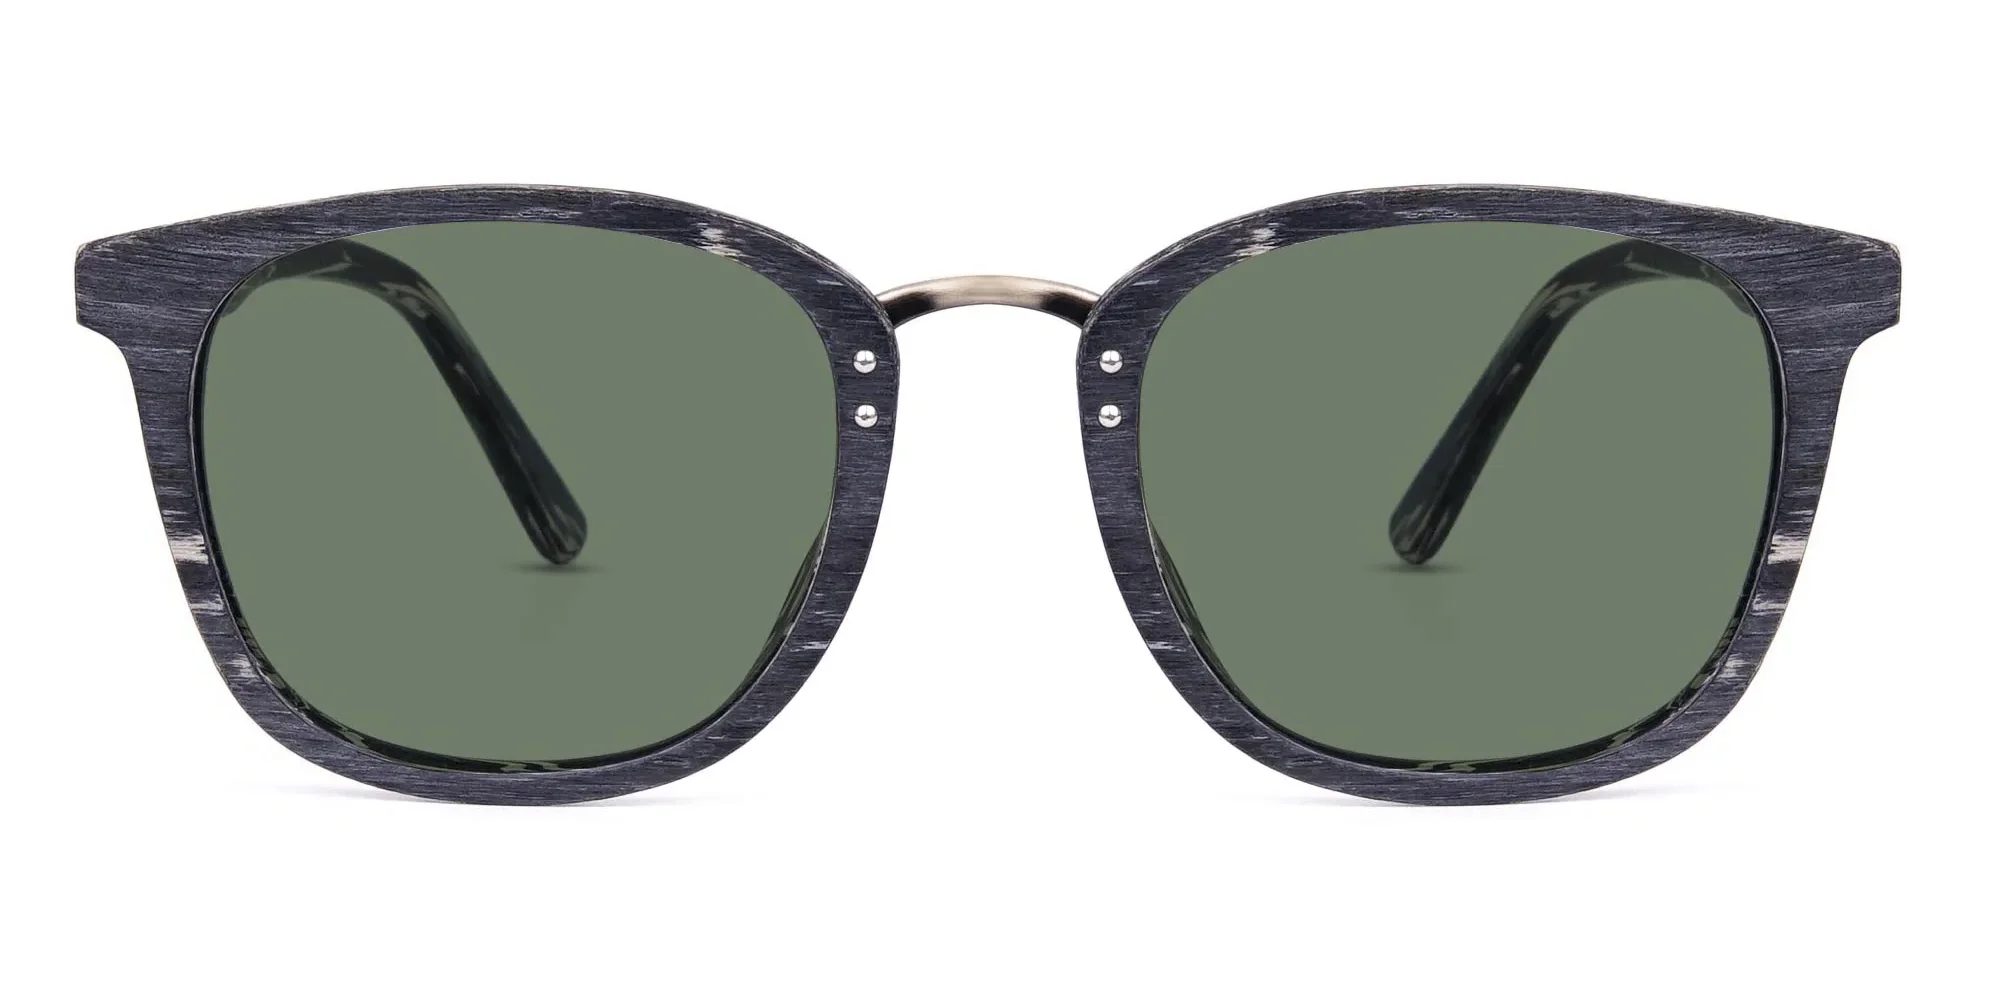 Wooden-Grey-Square-Sunglasses-with-Green-Tint-2